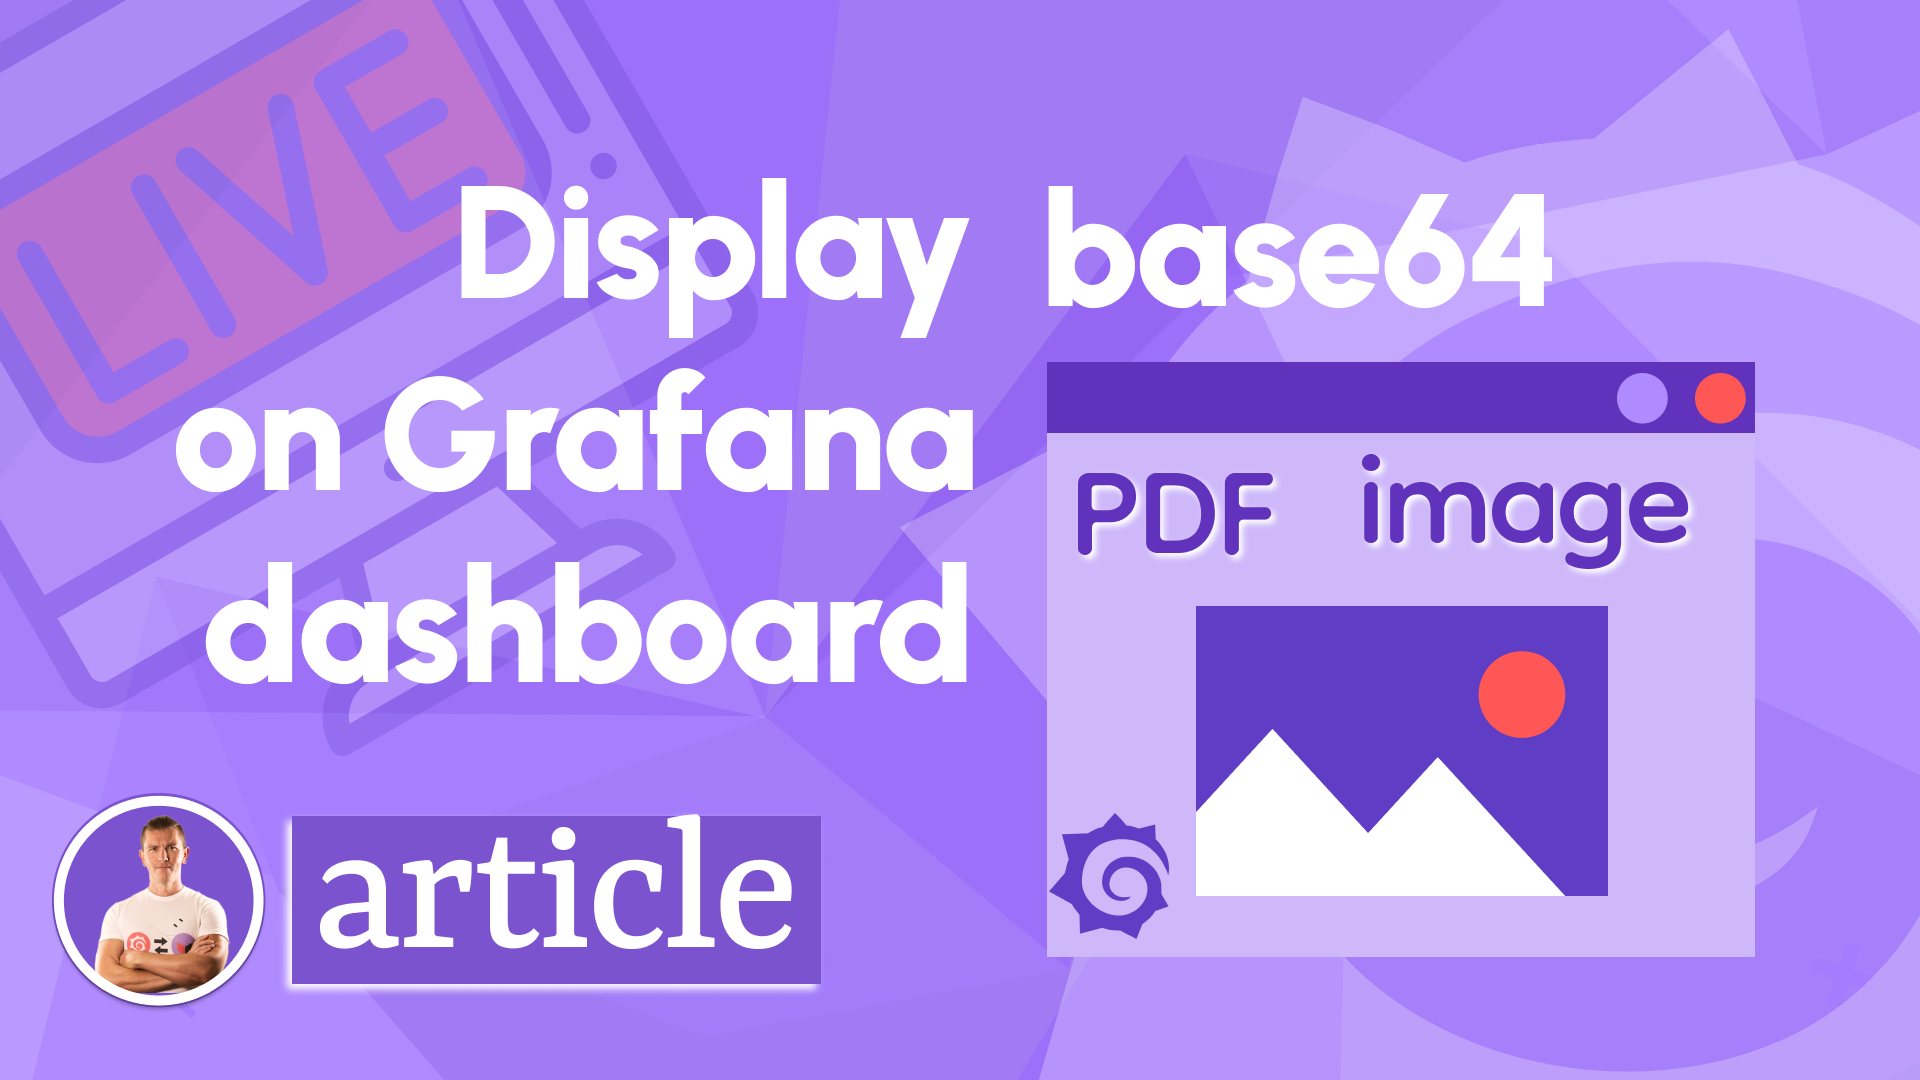 Display Base64 encoded images from any data source on your Grafana dashboard